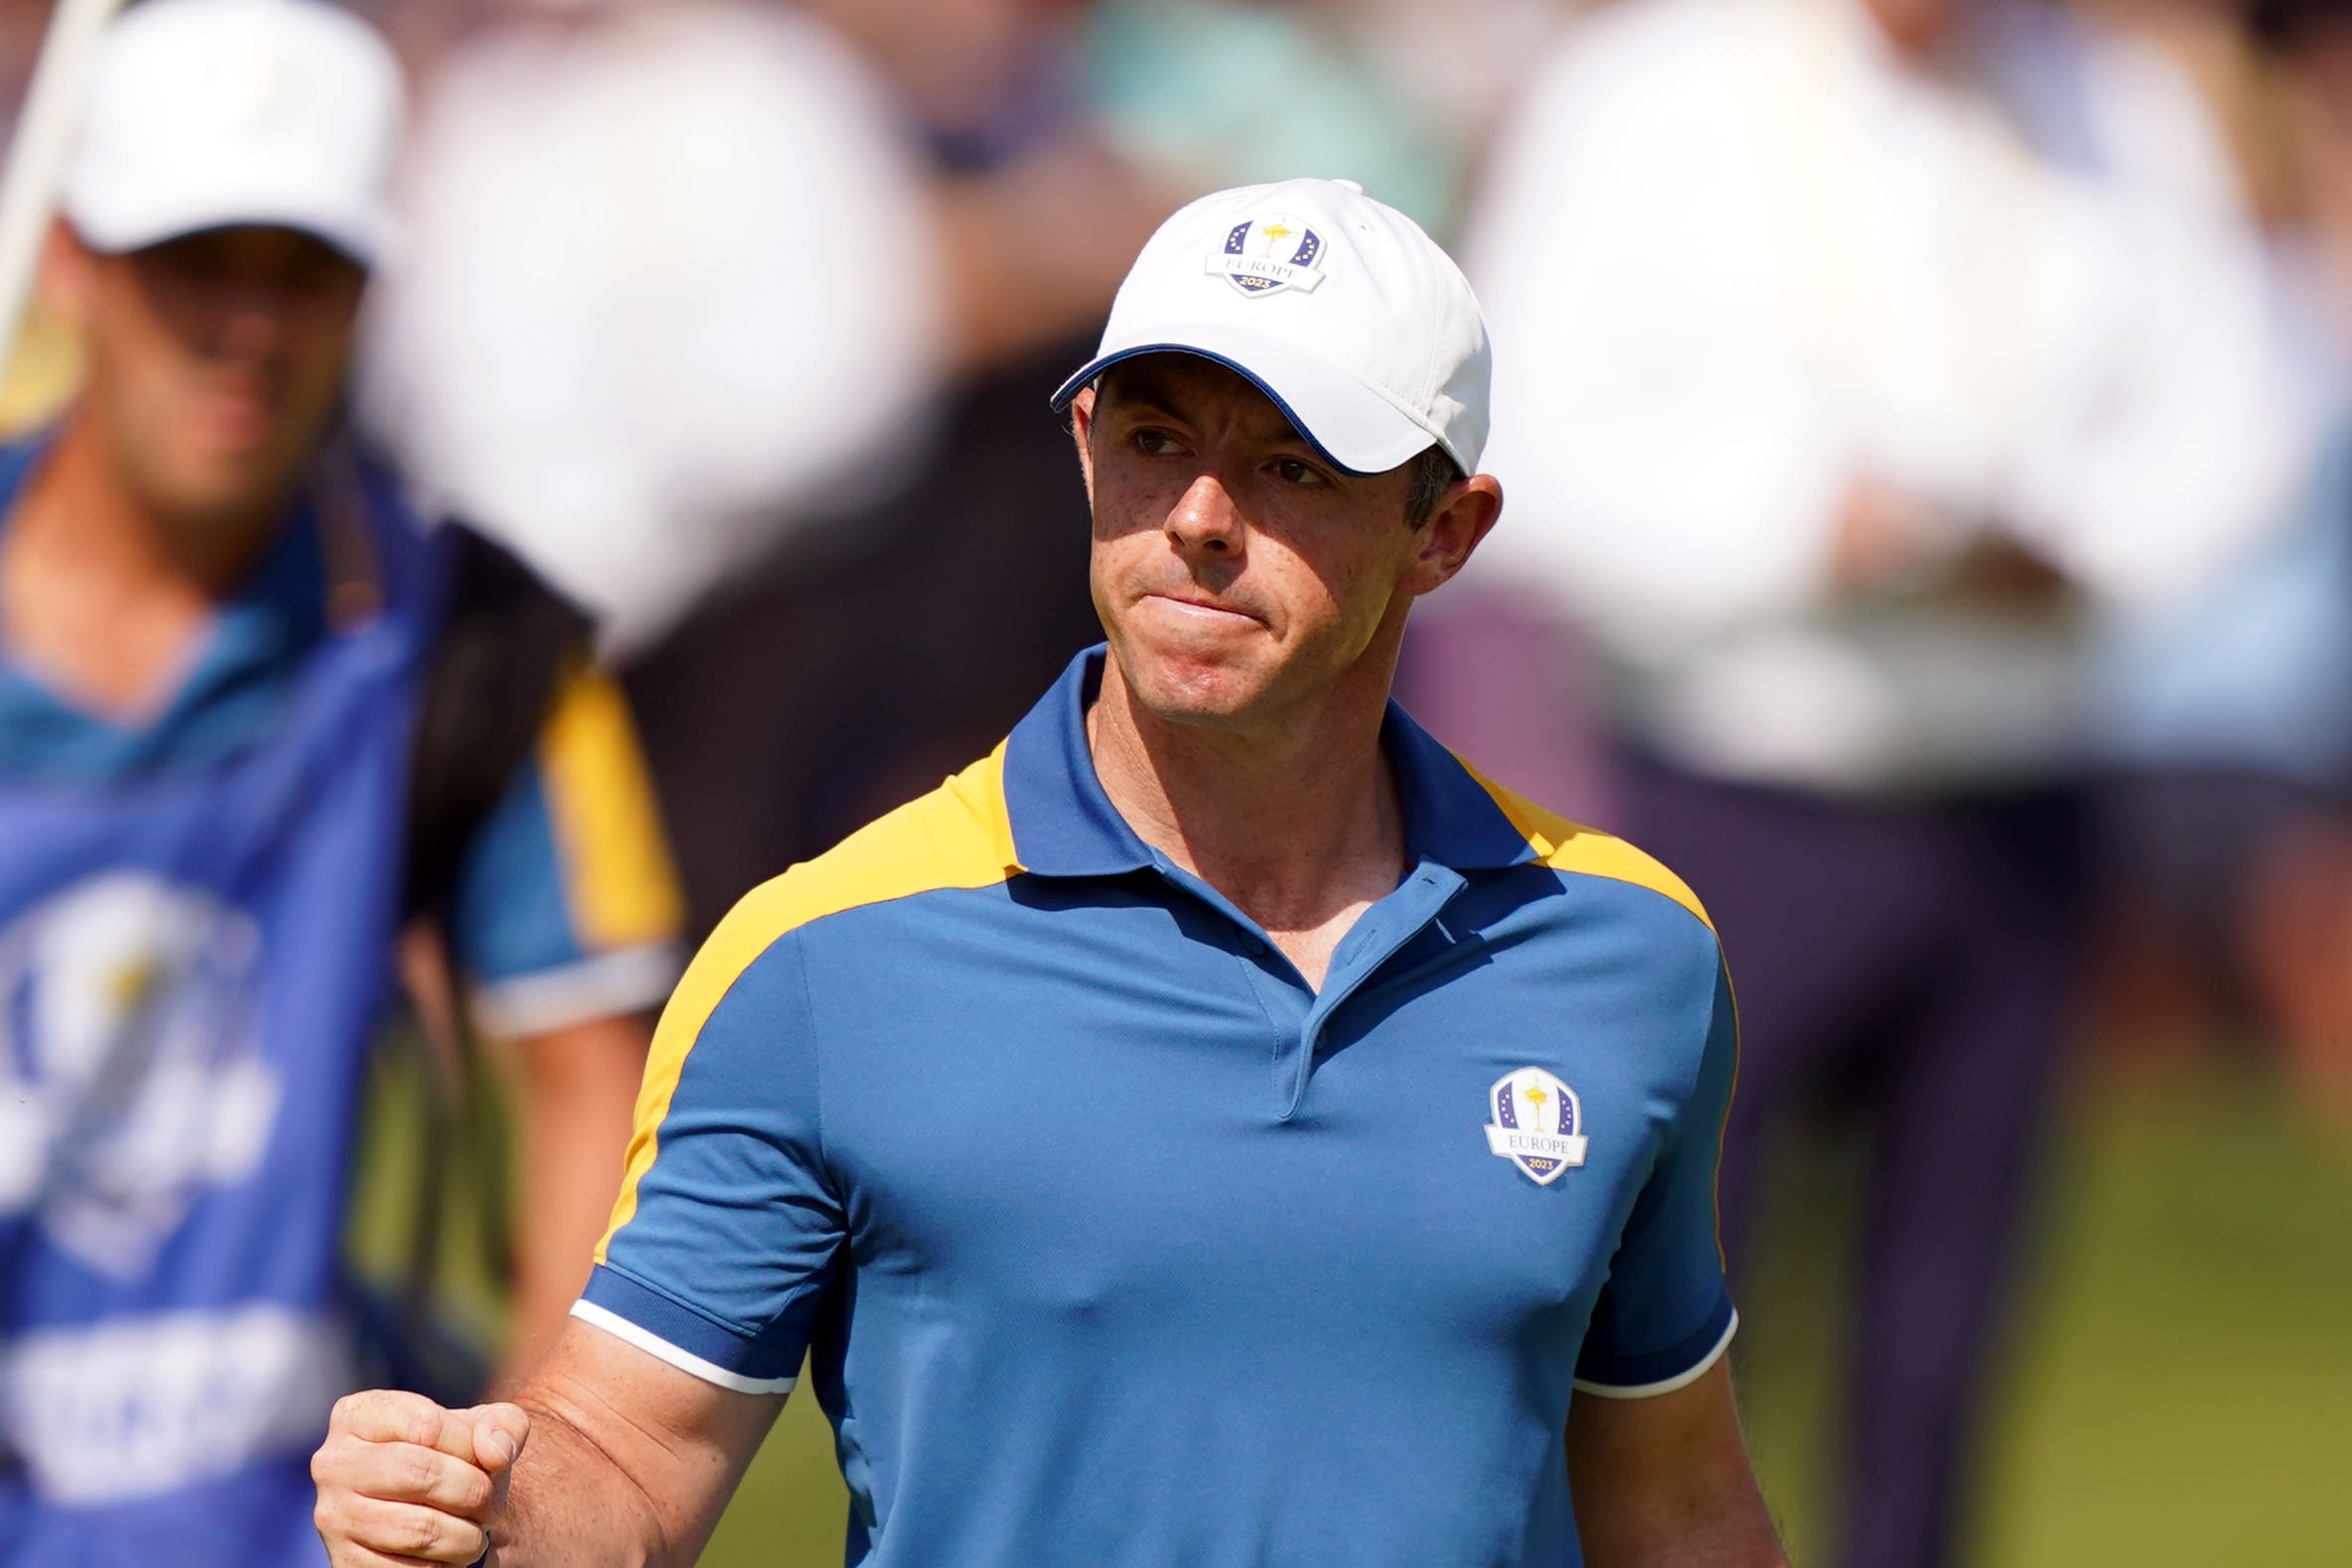 Rory McIlroy said he is open to investing in Manchester United (Zac Goodwin/PA)